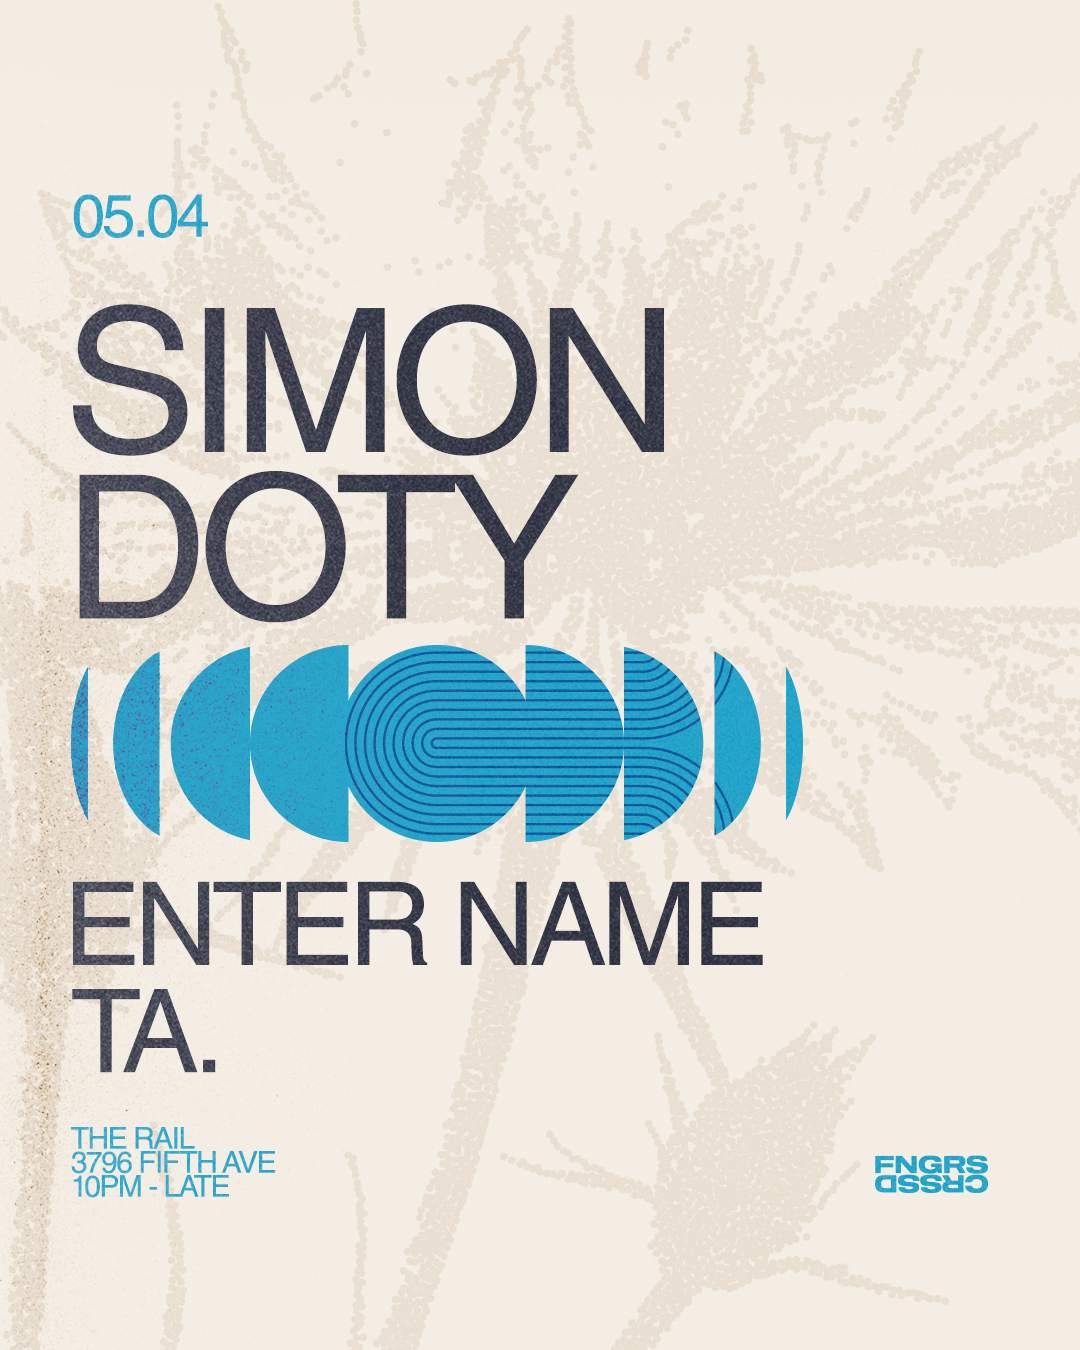 FNGRS CRSSD presents Simon Doty - フライヤー表